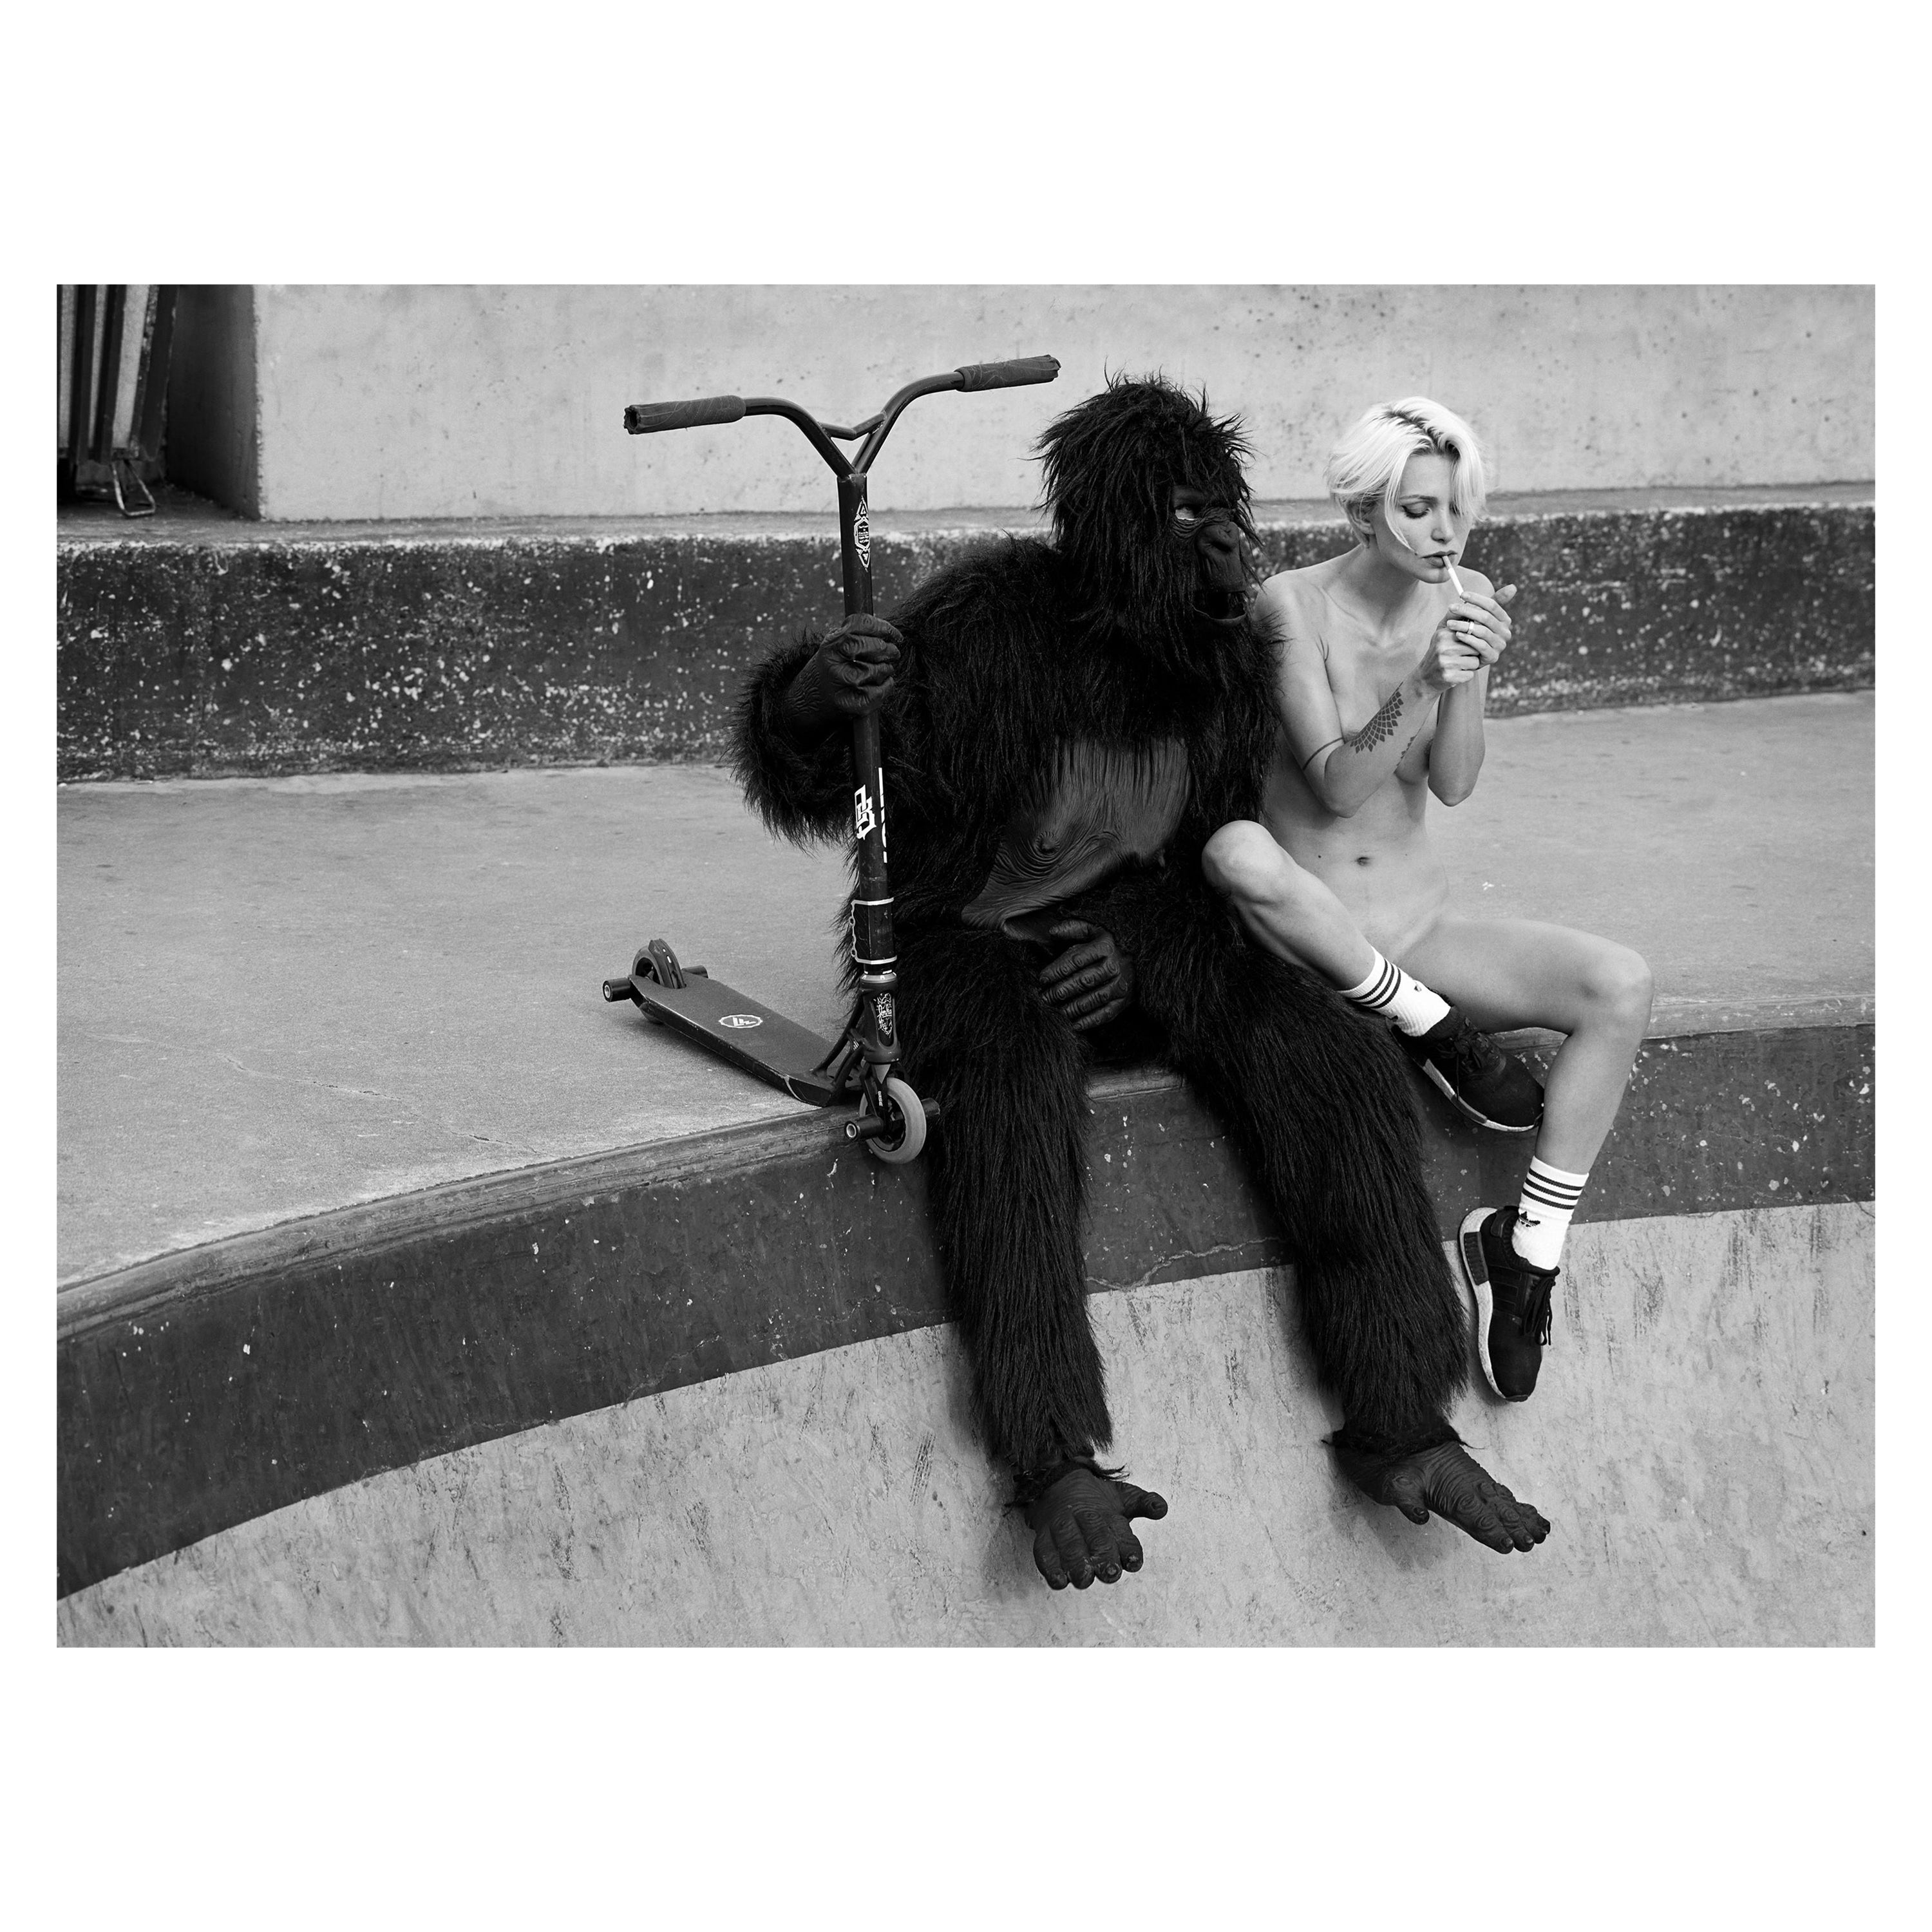 "Eva and Gorilla" Photography 16.5" x 23" inch  Edition 6/10 by Lukas Dvorak 

Pigment print on Epson Fine ART paper
2015

Ships rolled in a tube 

ABOUT THE ARTIST
Lukas Dvorak is a Czech photographer born in Prague in 1982. His preference goes to